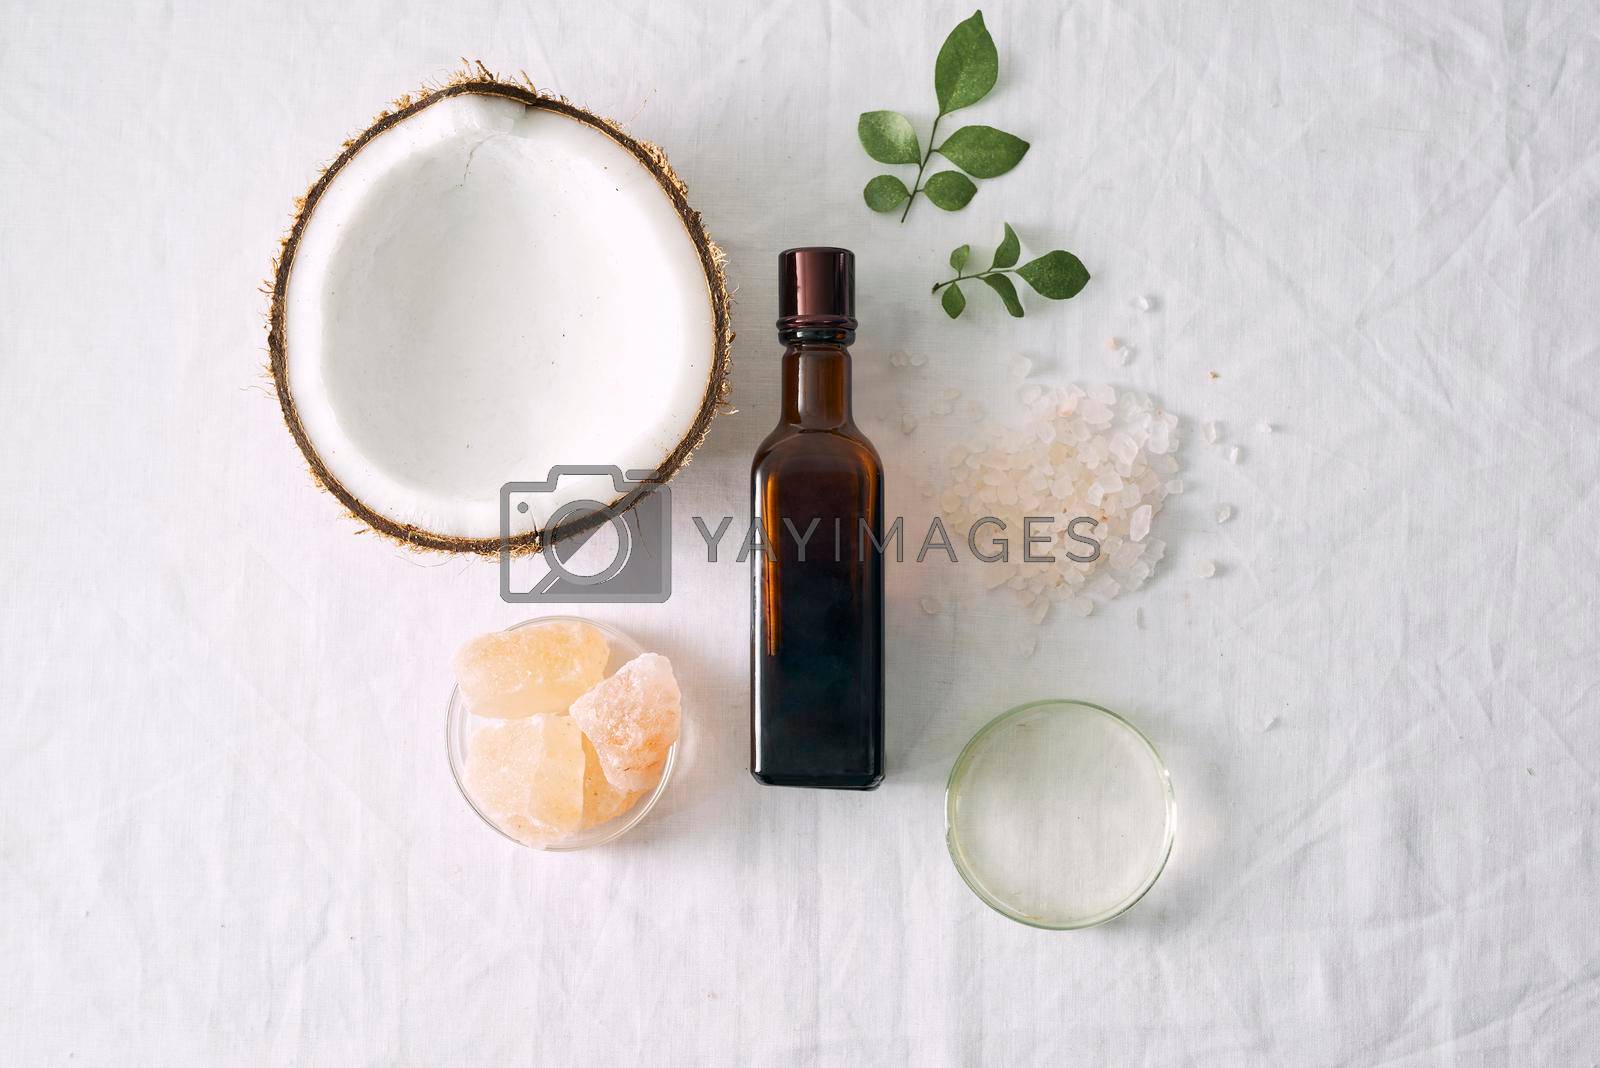 Royalty free image of cosmetic nature skincare and essential oil aromatherapy .organic natural science beauty product .herbal alternative medicine . mock up.  by makidotvn